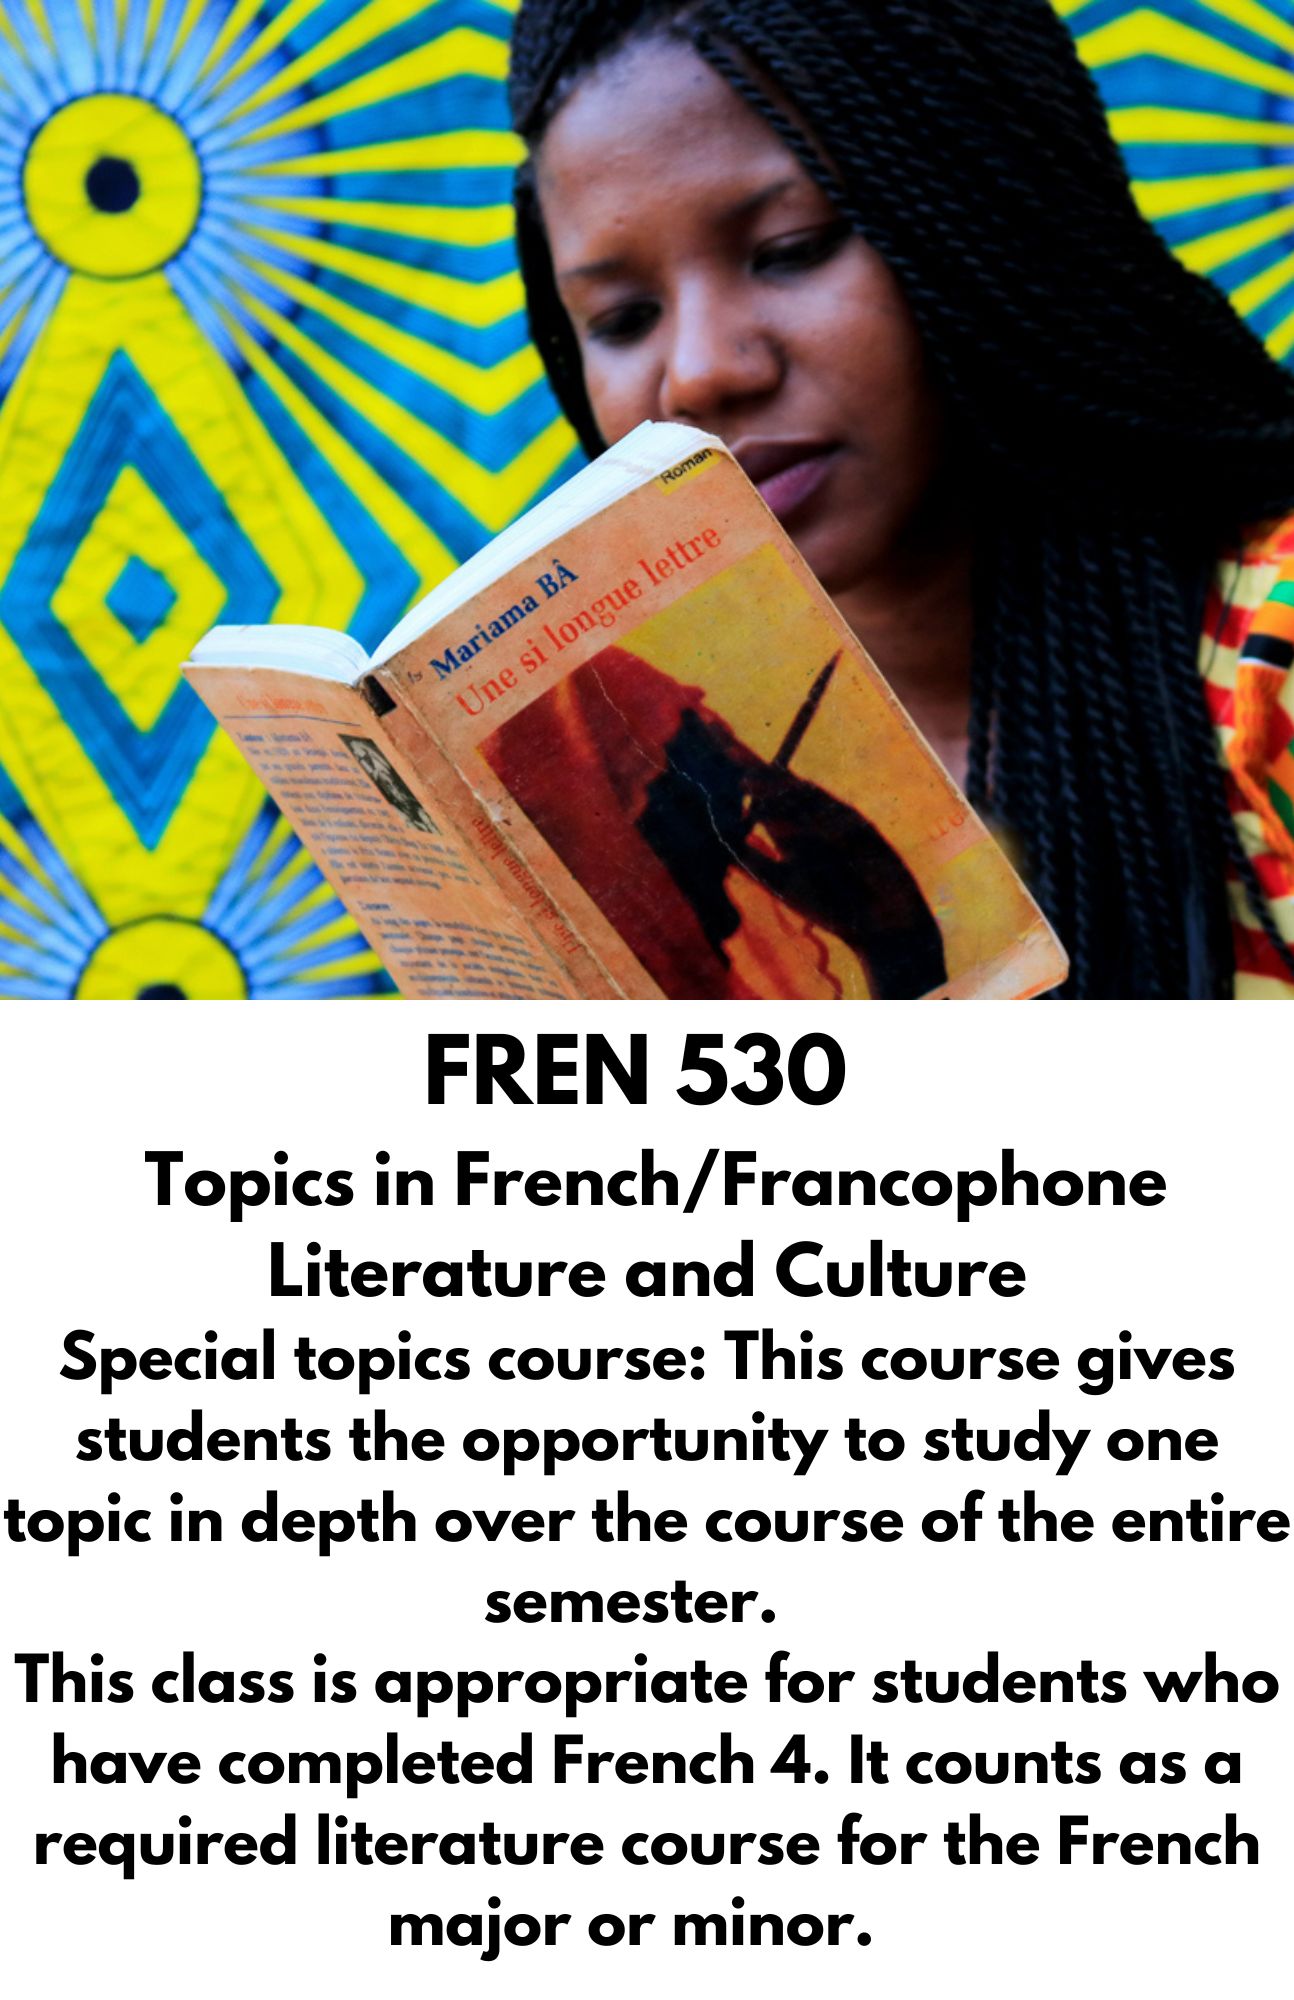 FREN 530   Topics in French/Francophone Literature and Culture Special topics course: This course gives students the opportunity to study one topic in depth over the course of the entire semester.   This class is appropriate for students who have completed French 4. It counts as a required literature course for the French major or minor.